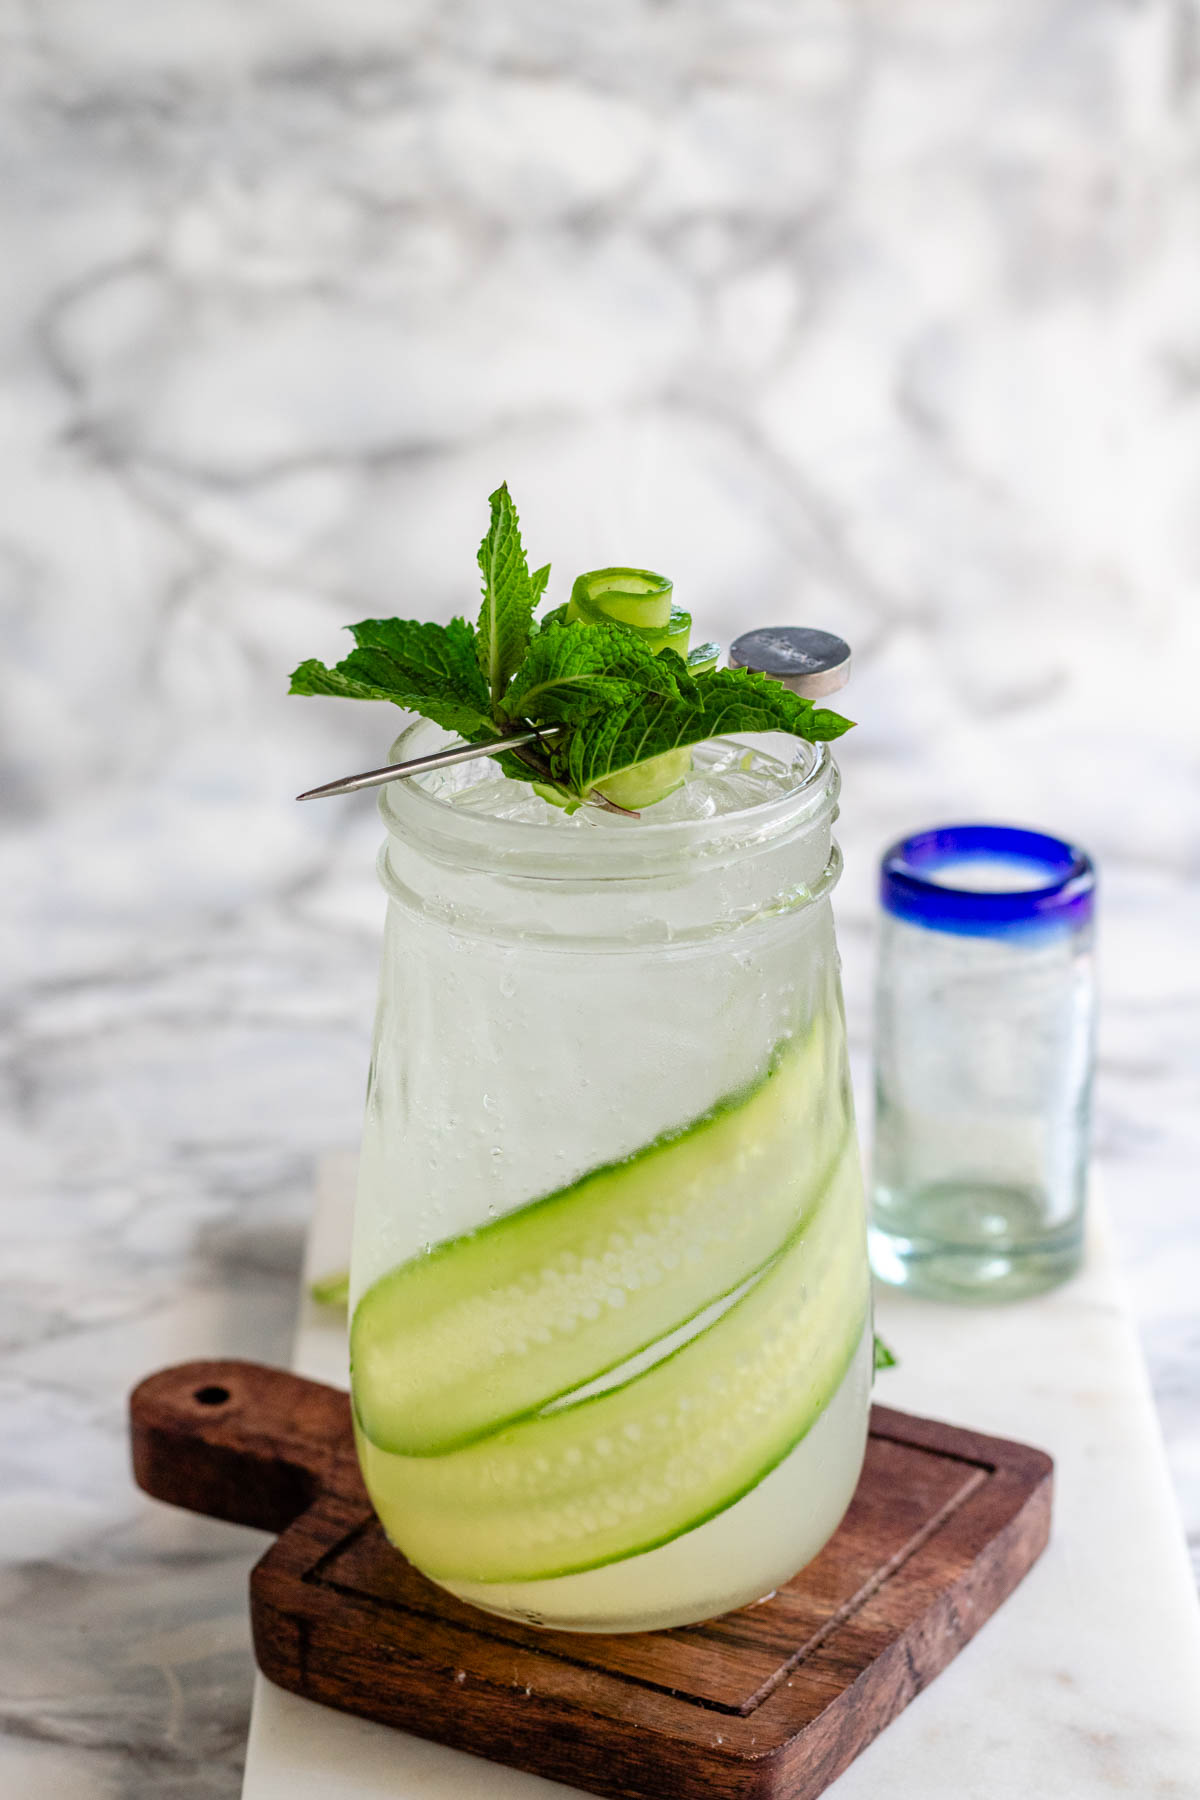 A tapered glass holds a clear drink with cucumber ribbons in it and a mint cucumber garnish on top.